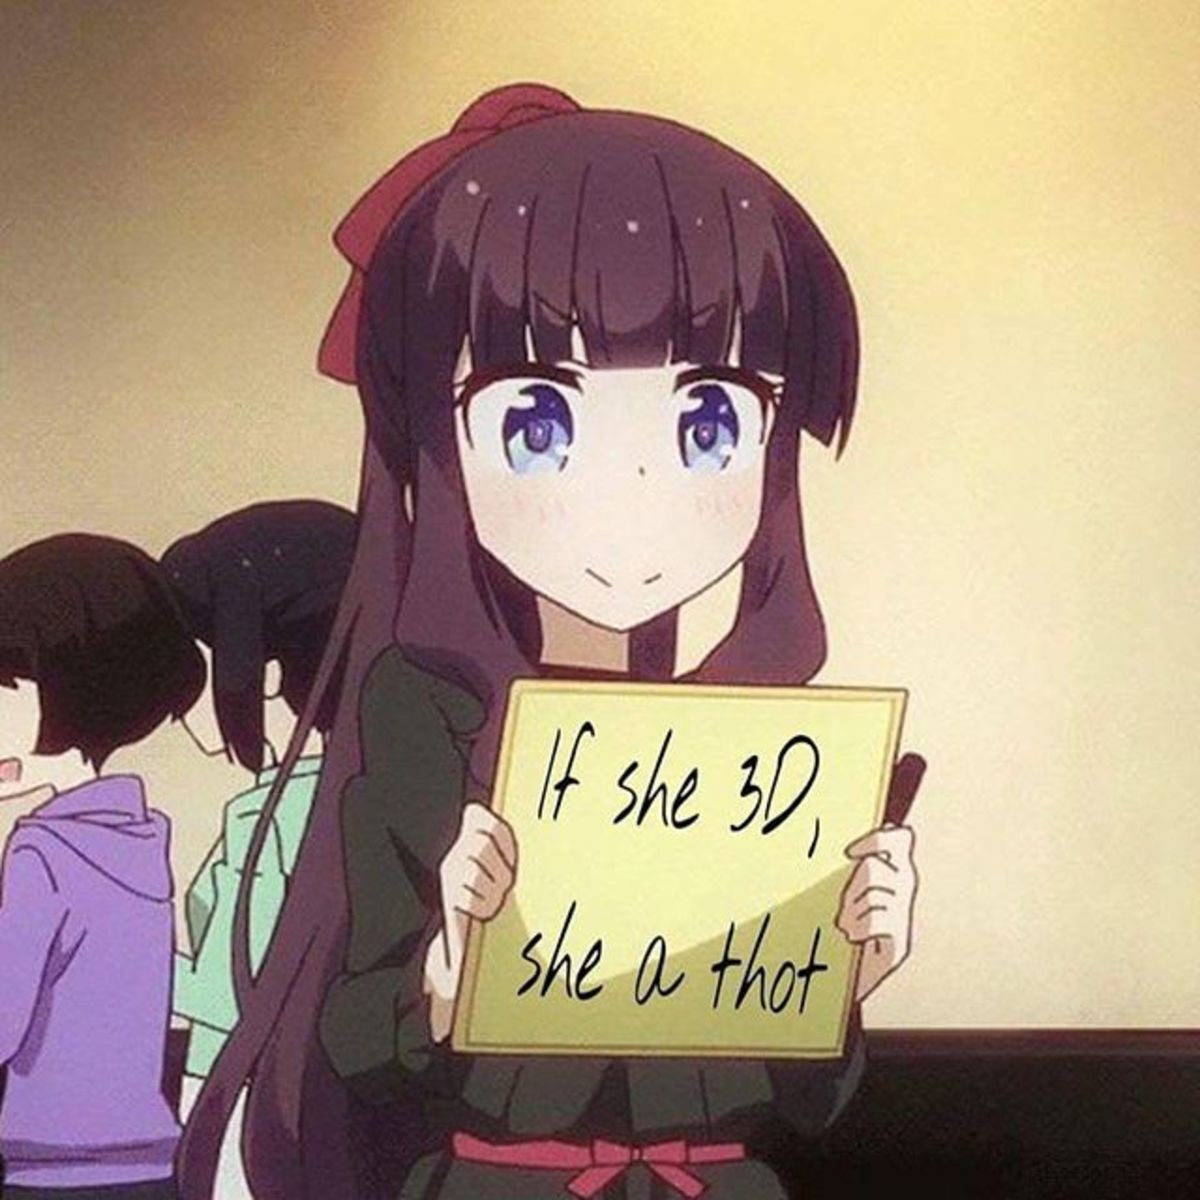 Does An Anime Girl Holding A Sign Count As A Meme Today